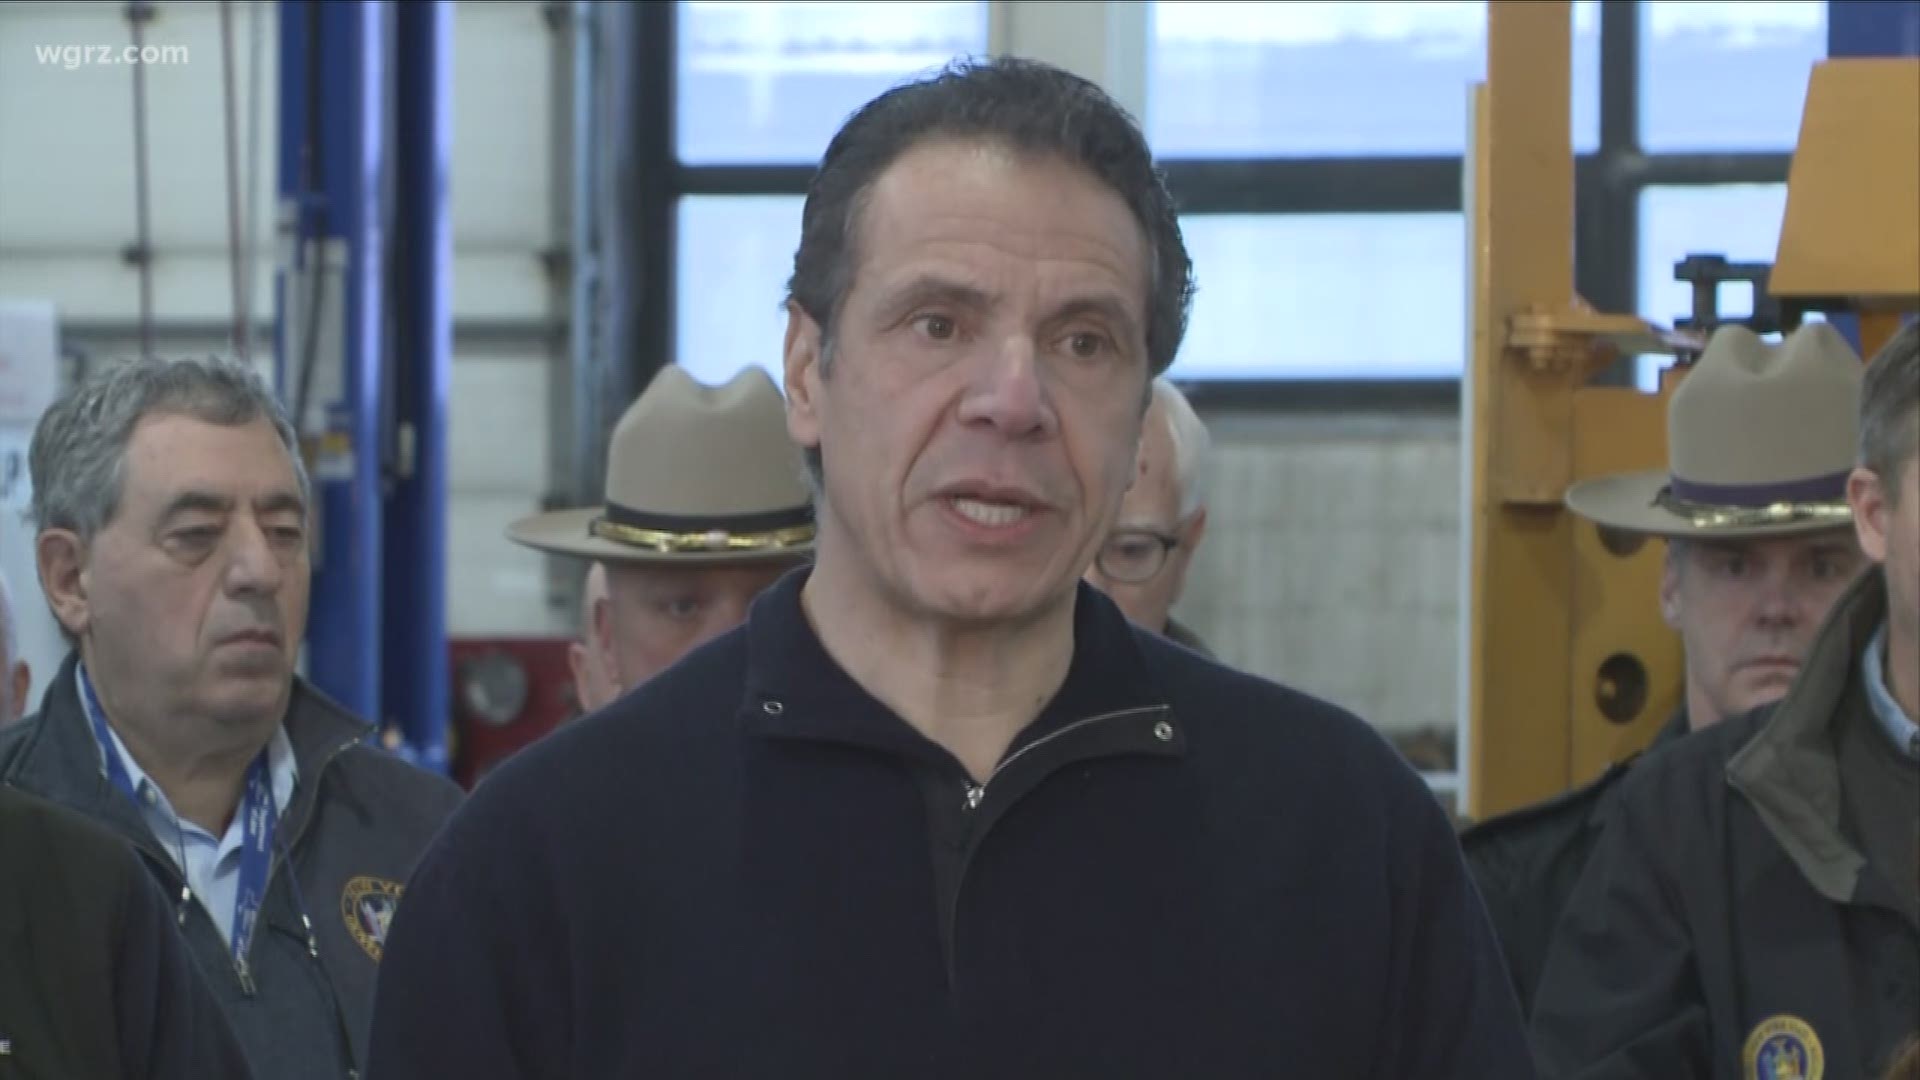 Cuomo: that tractor trailer ban is serious.